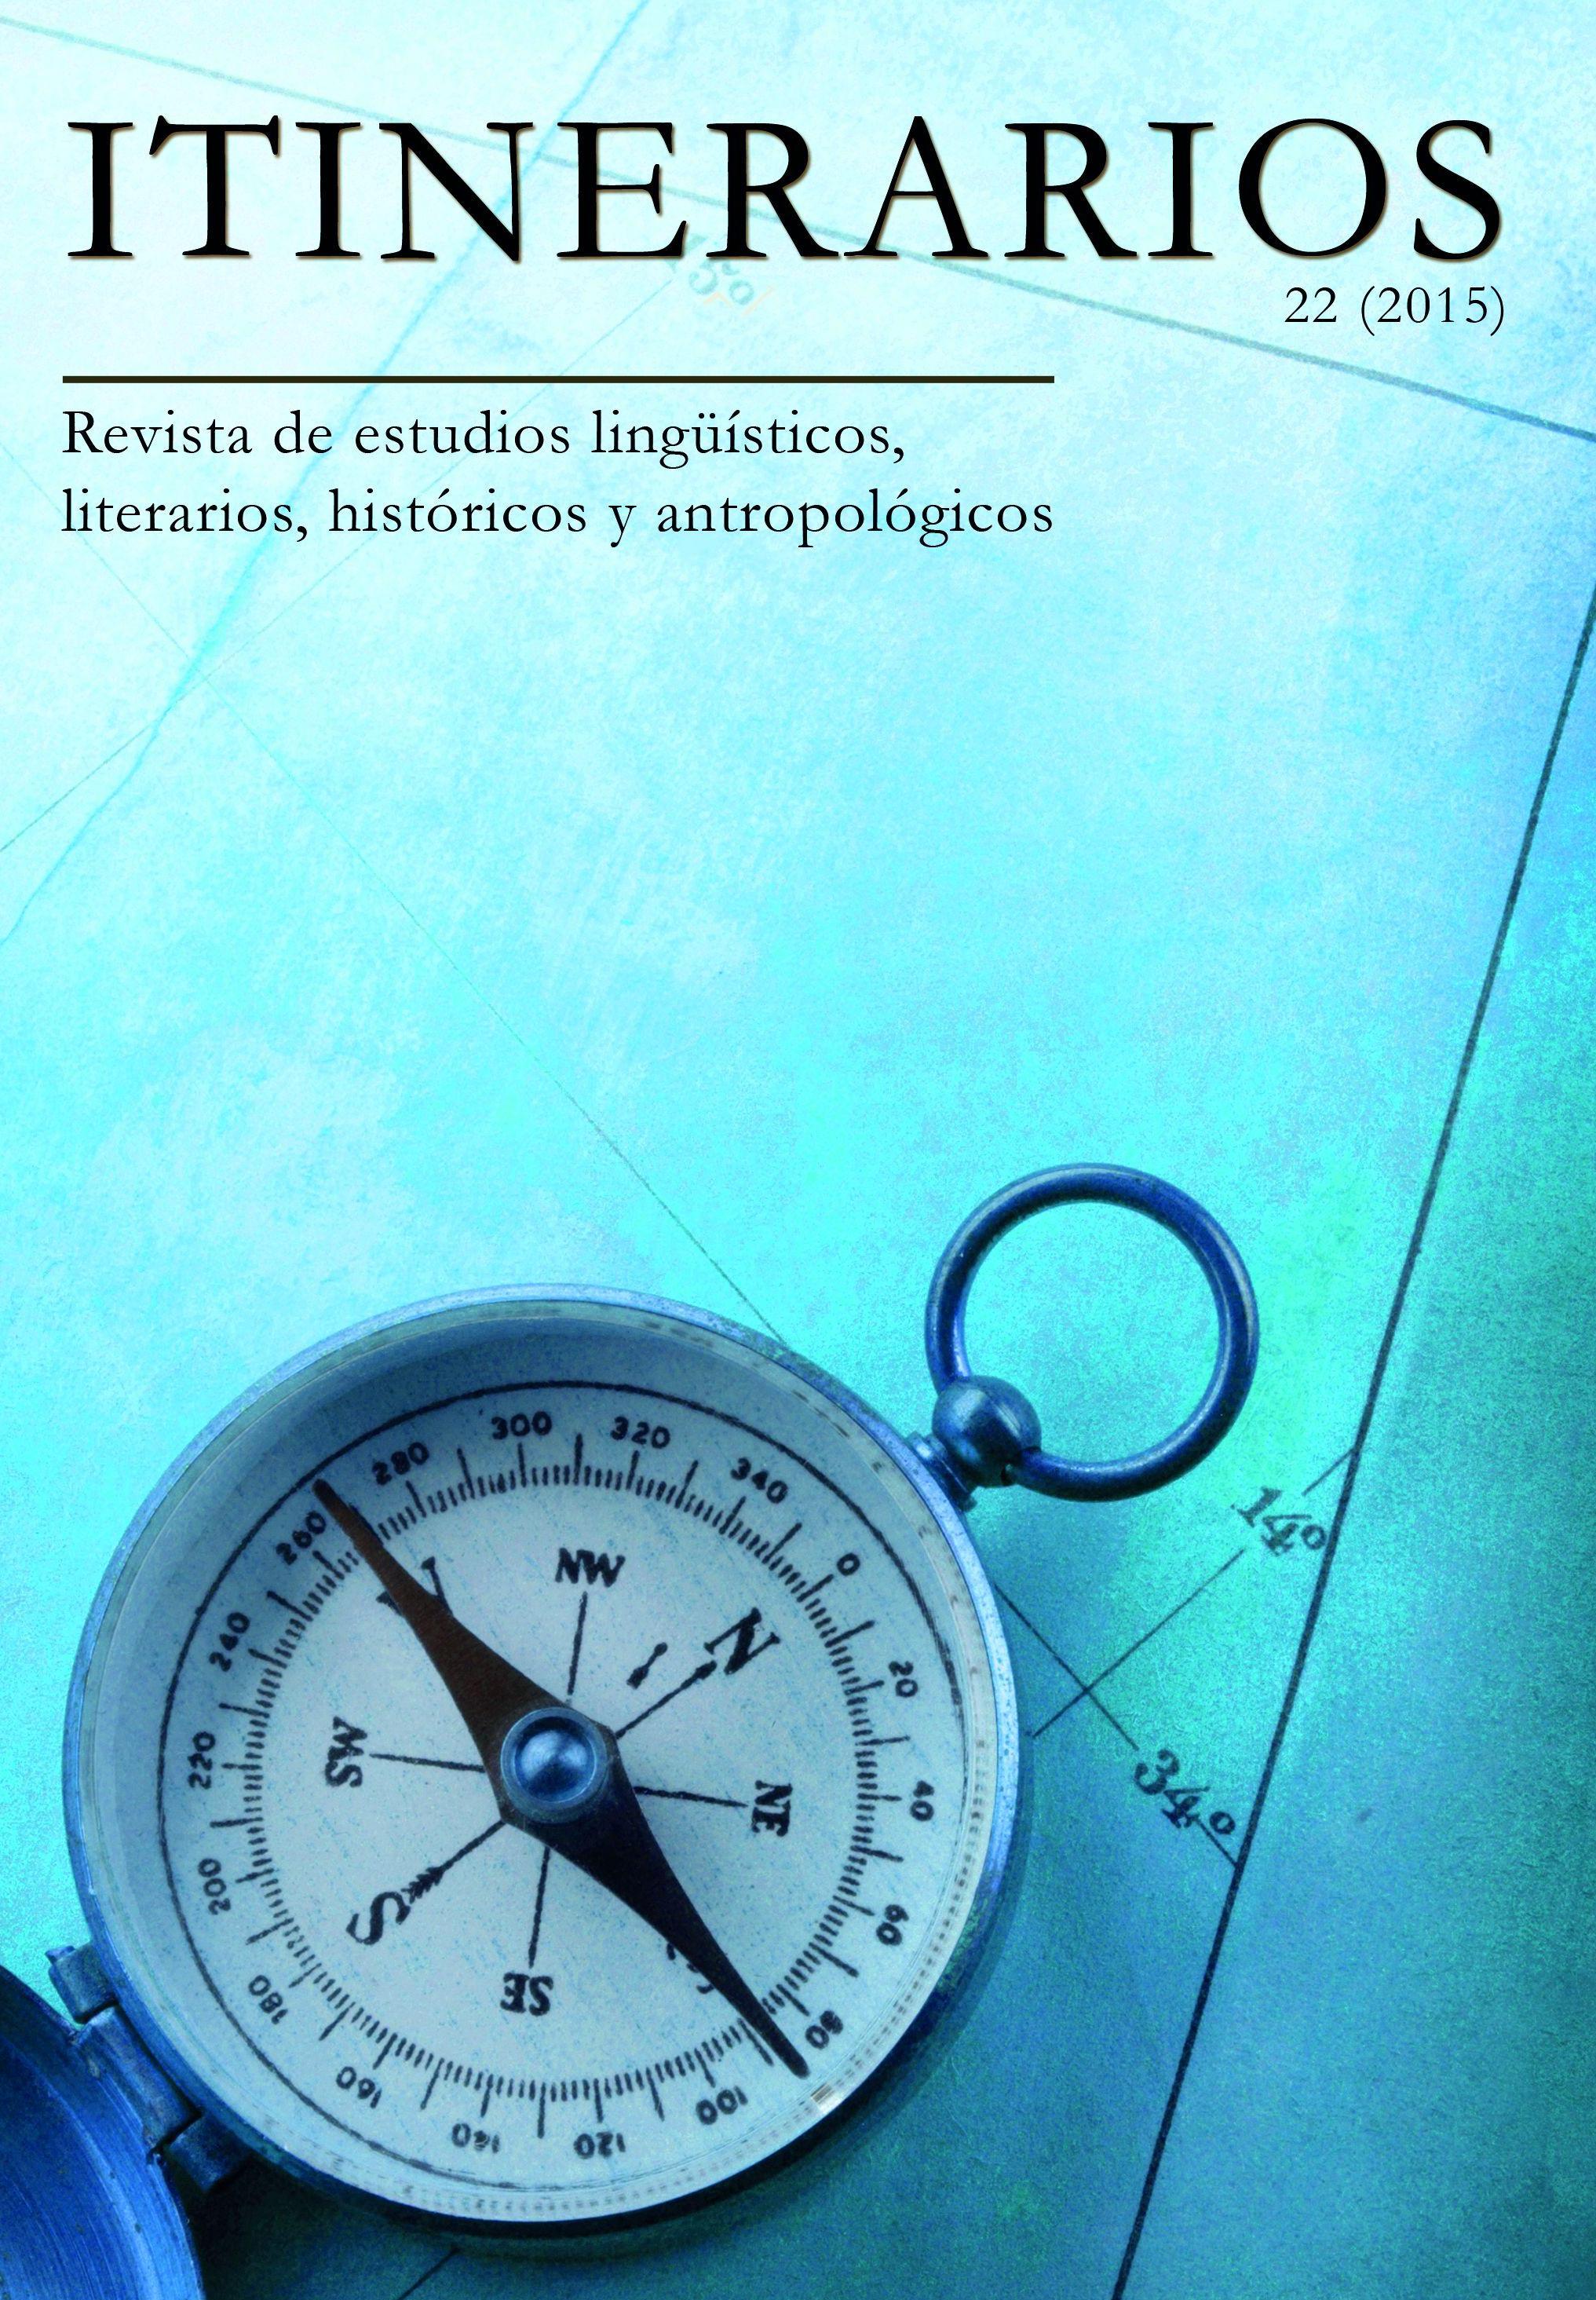 Vowel Reduction and Stress Shift Perception in Spanish Cover Image